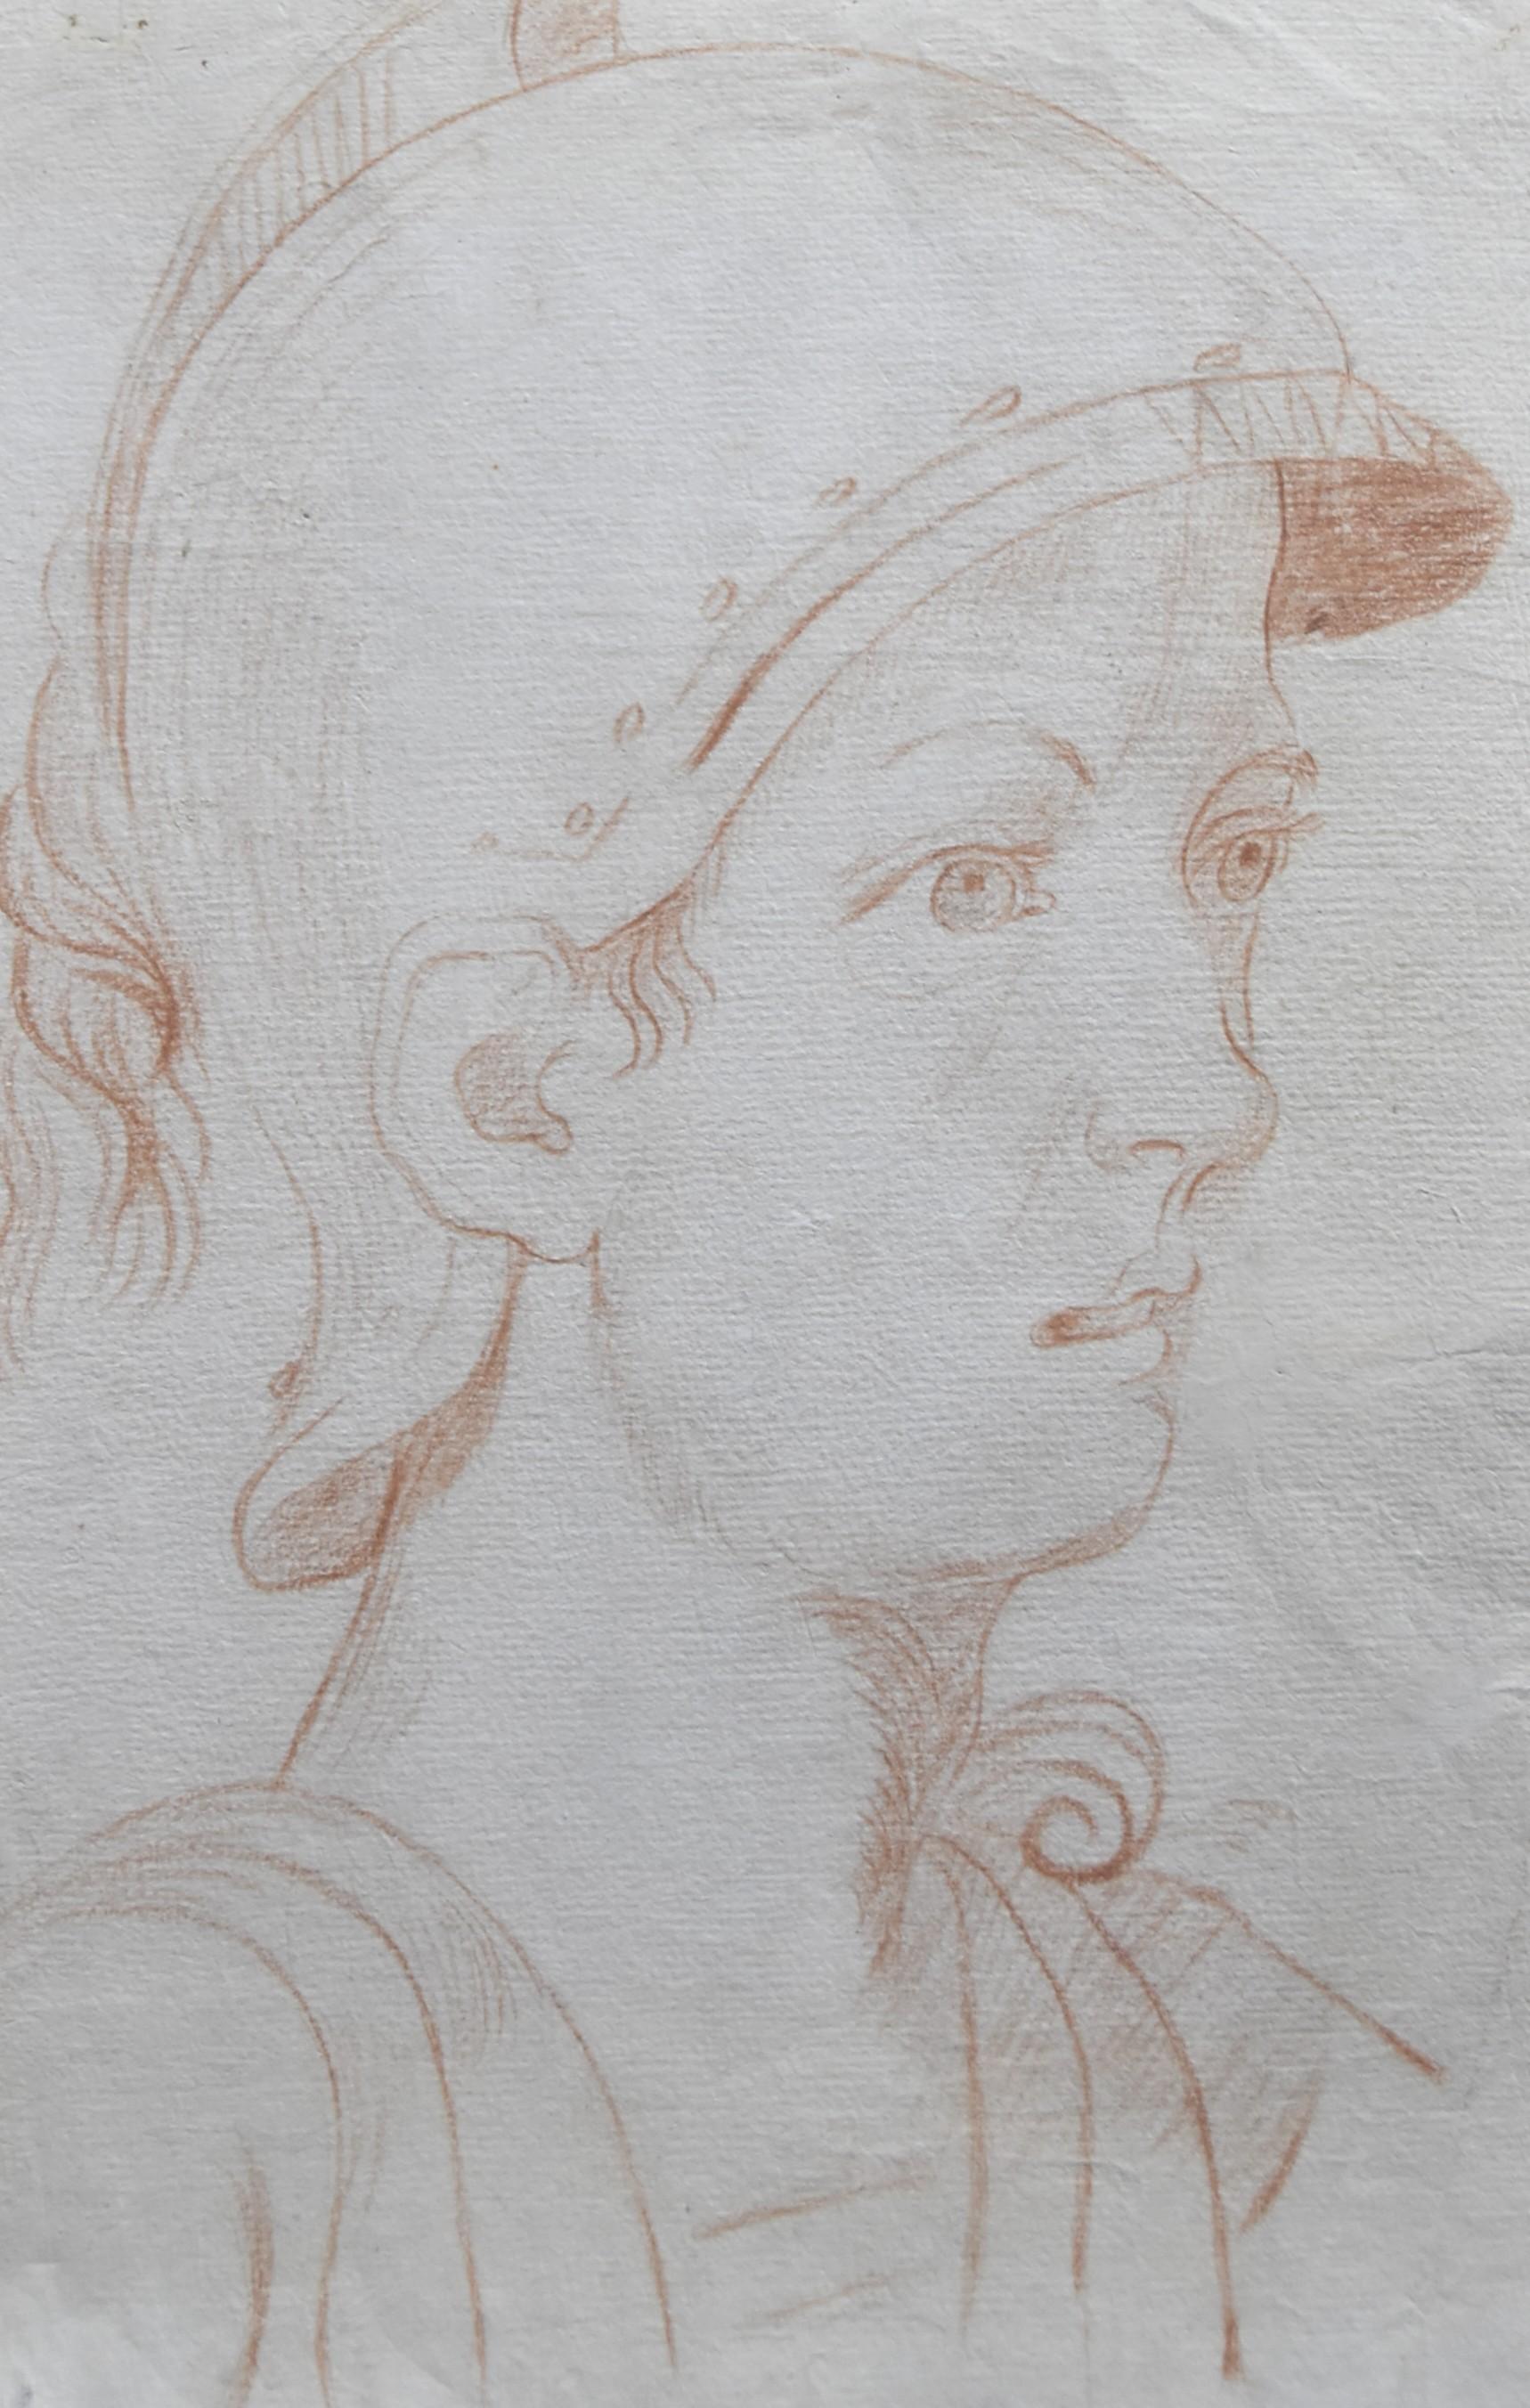 Italian School 18th century,  An Ancient soldier in profile, red chalk on paper - Baroque Art by Unknown